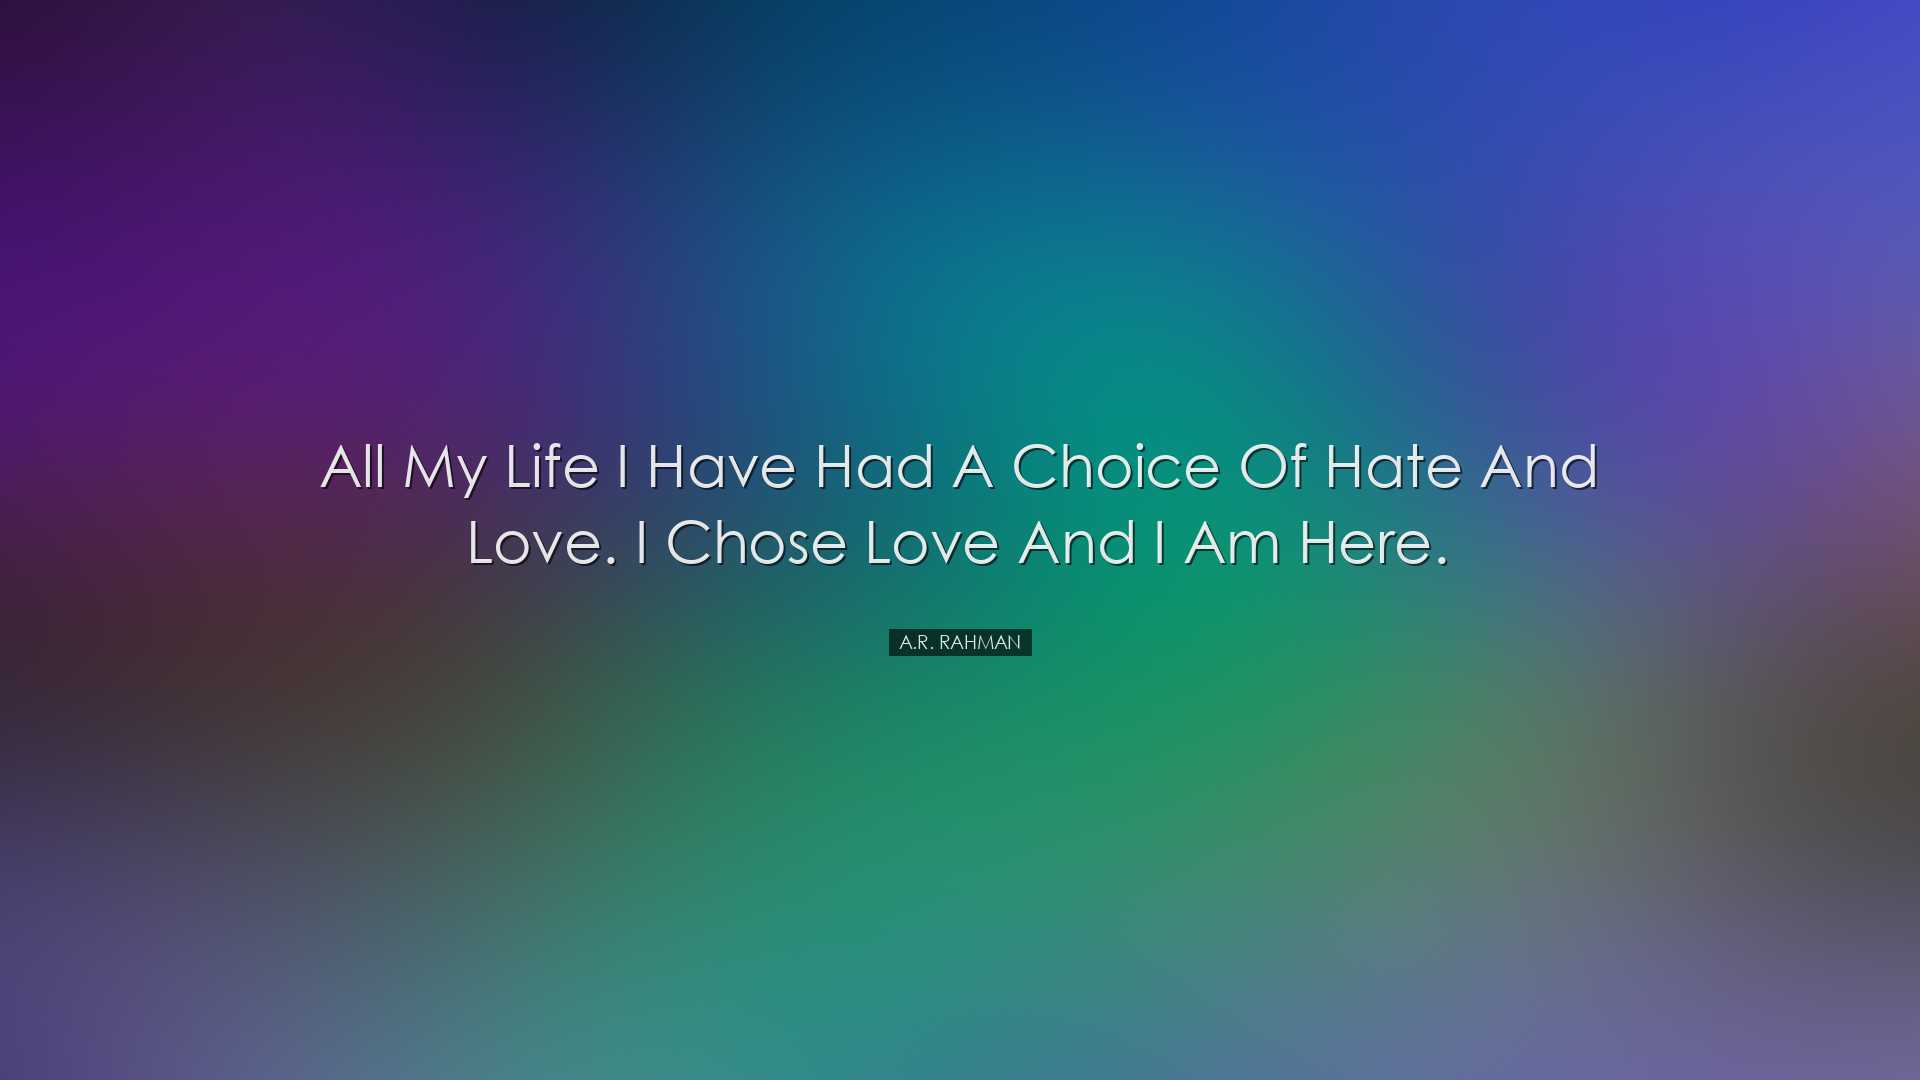 All my life I have had a choice of hate and love. I chose love and